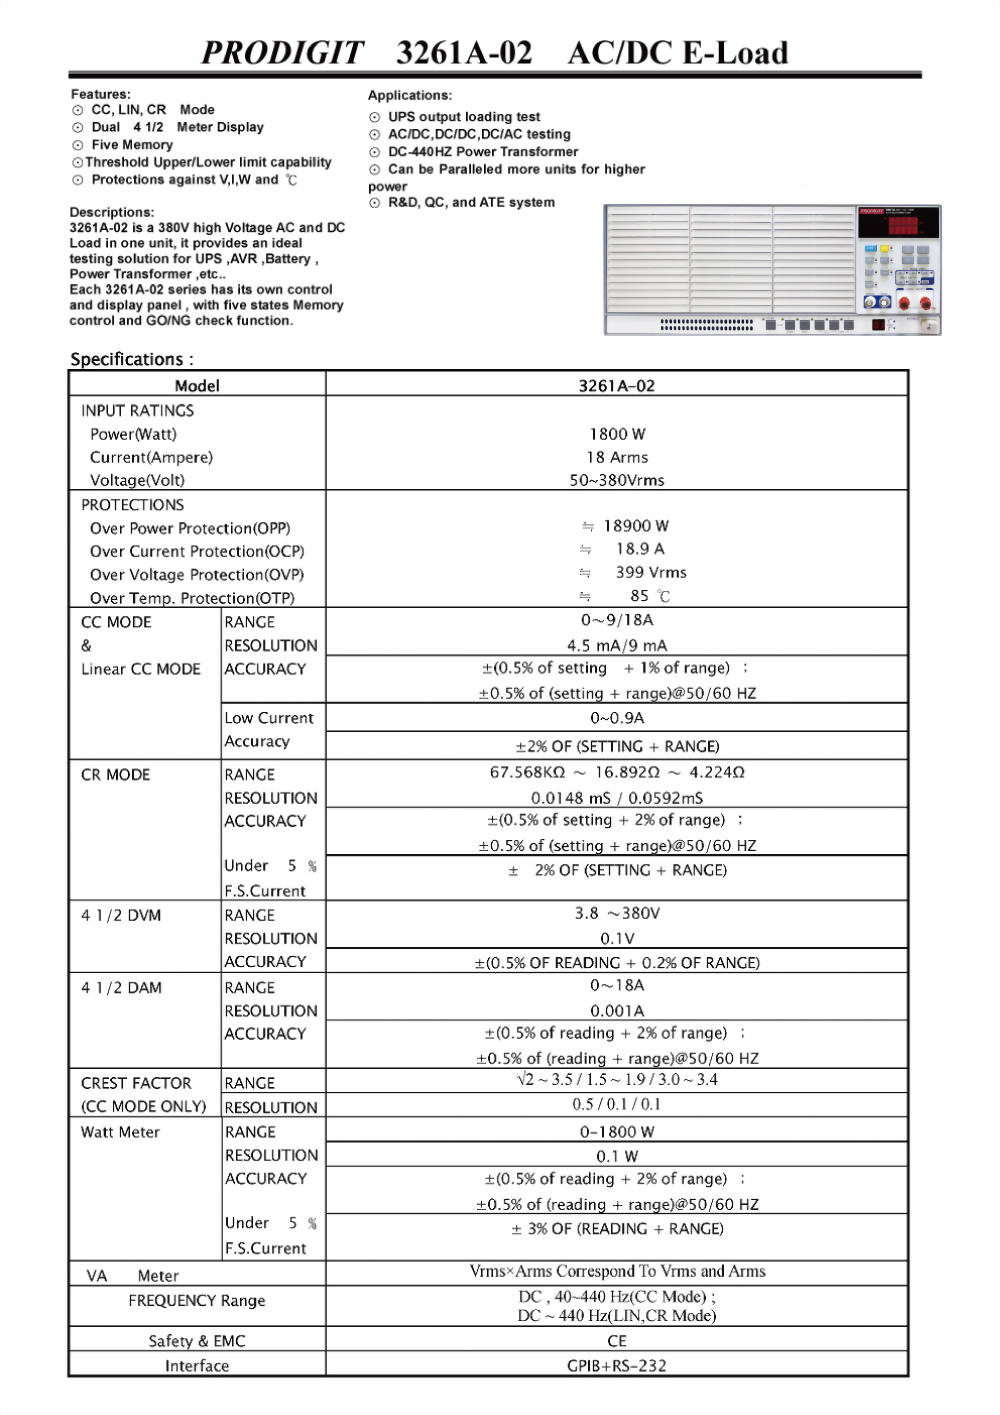 3261a-02_specifications.jpg